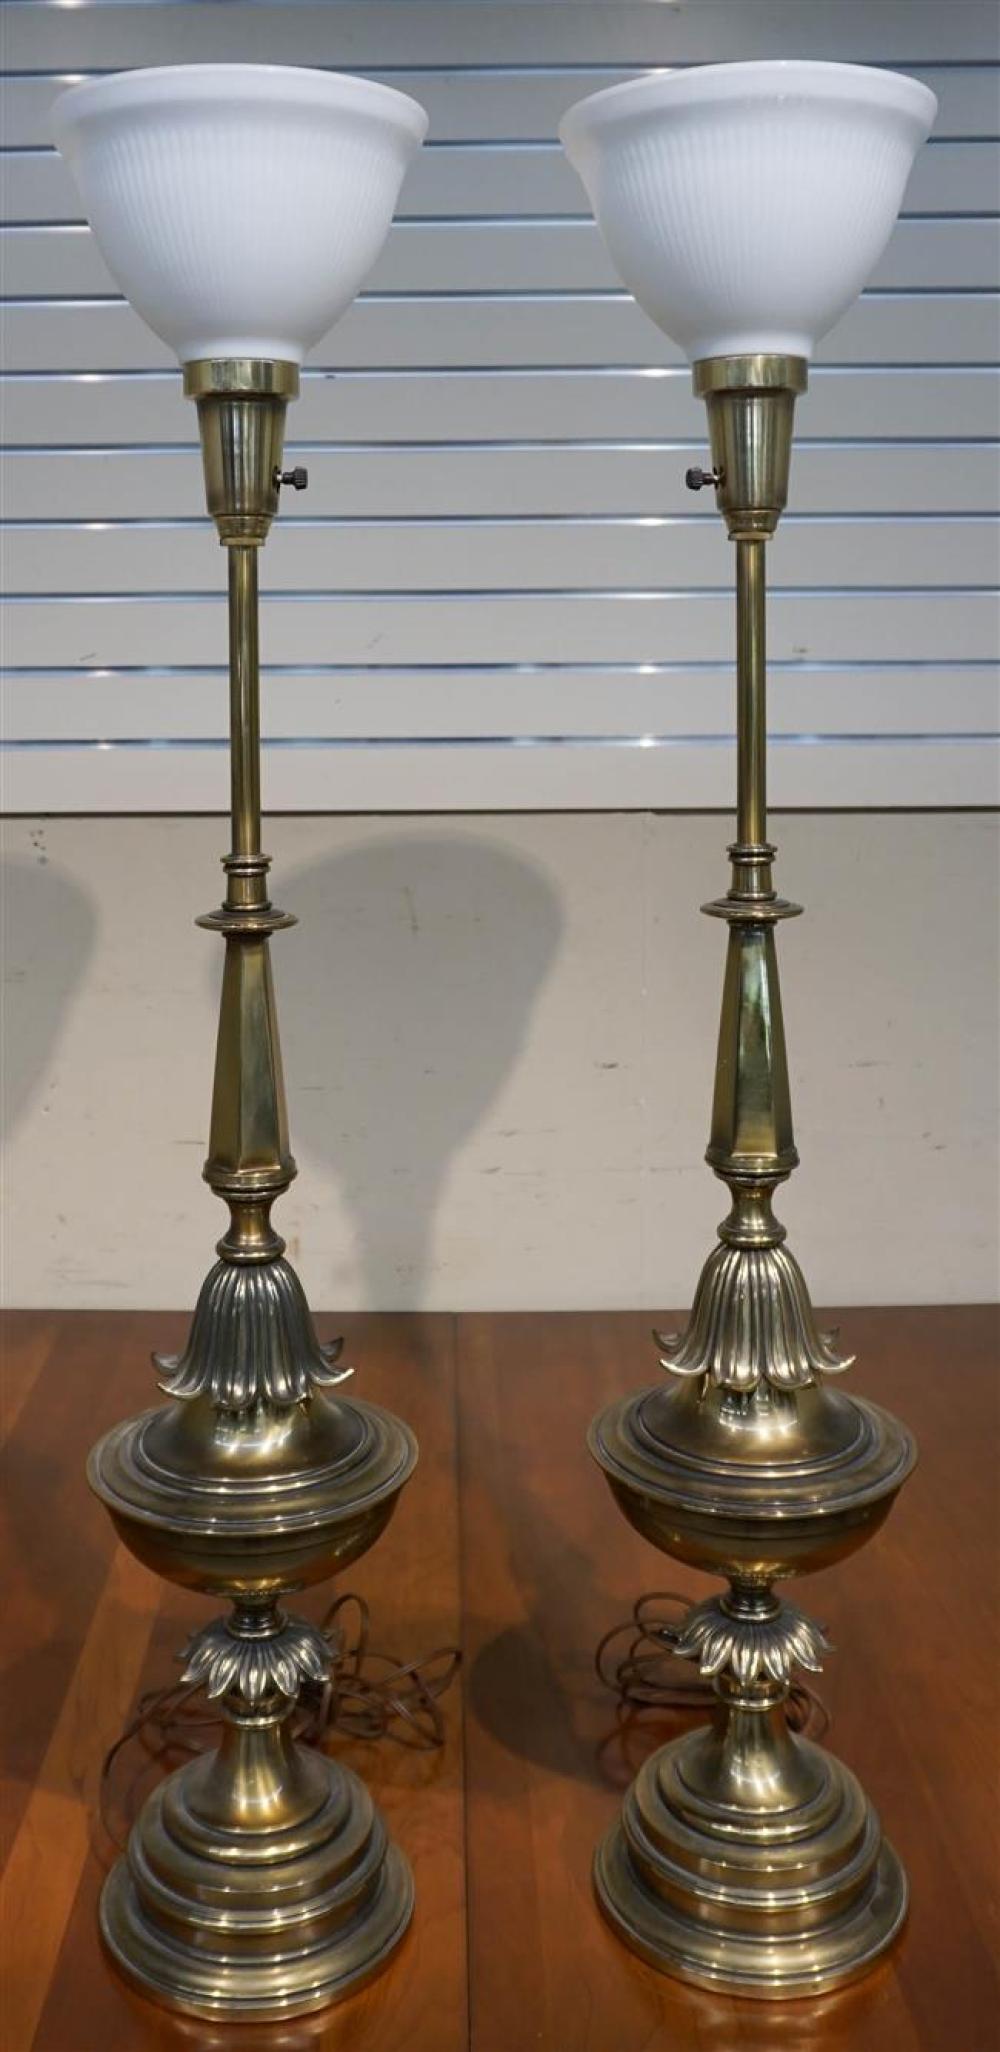 PAIR BRASS TABLE LAMPS, H: 40 INCHESPair